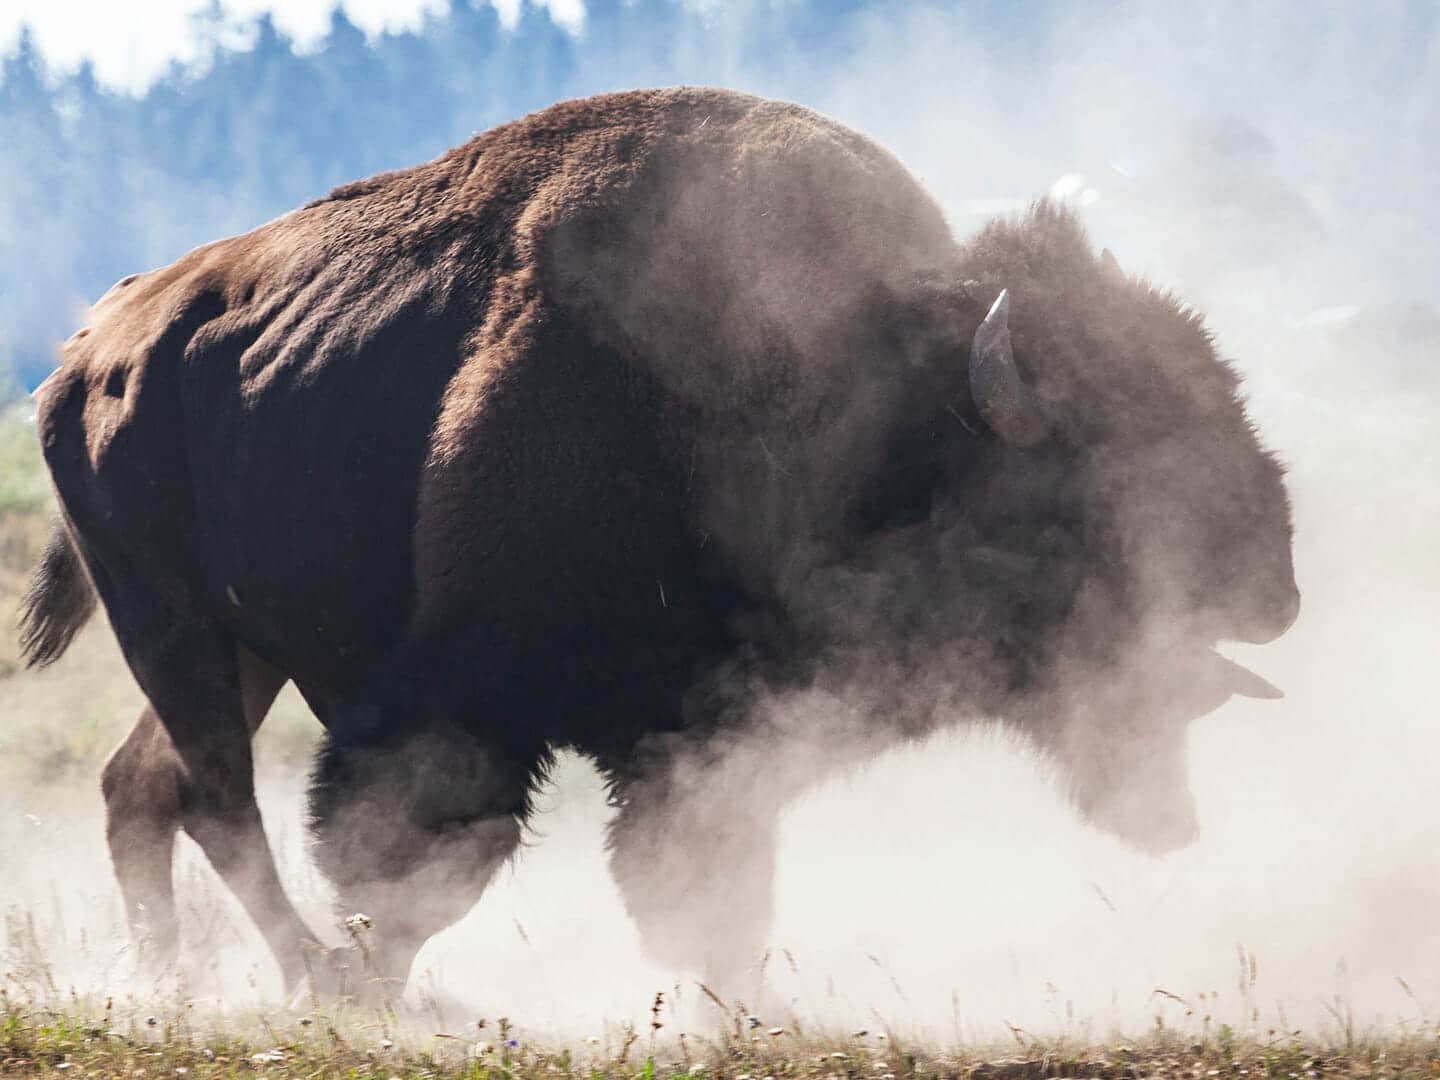 A Bull Bison In Rut Kicks Up A Dust Cloud In Yellowstone National Park